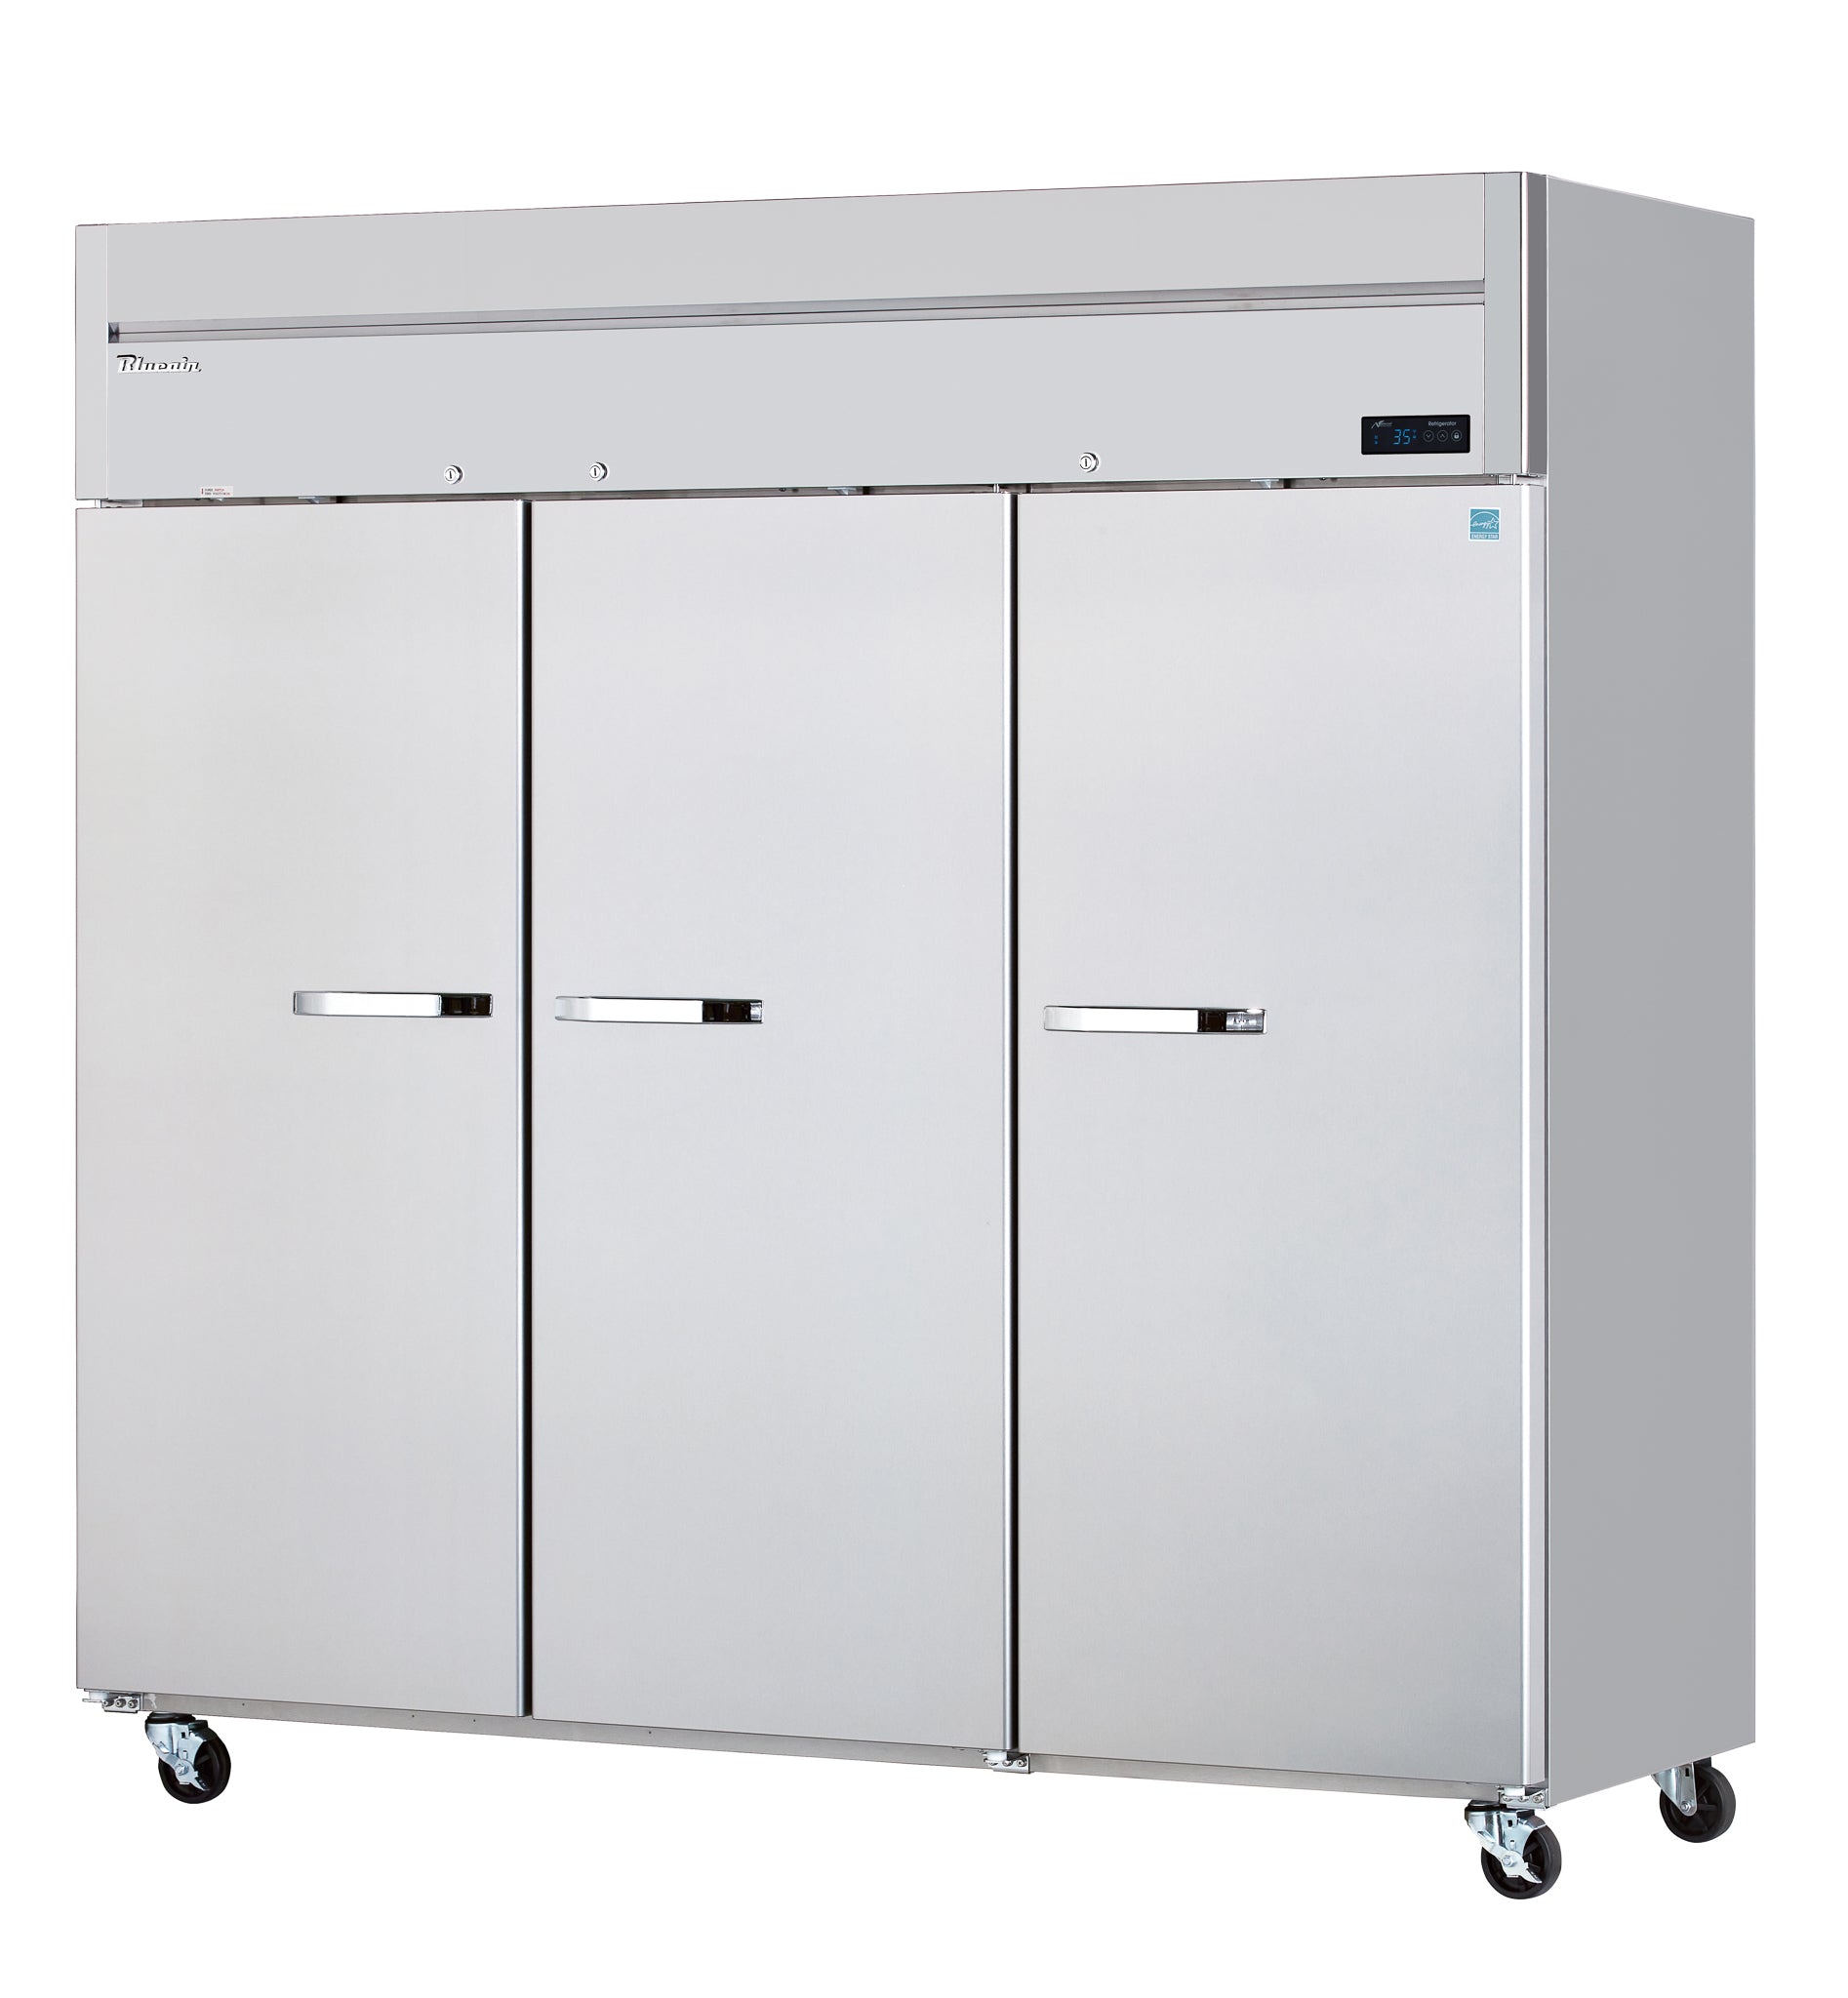 Blue Air - BSR72T-HC, 3 Solid Doors Stainless Refrigerator, Top-Mount Compressor, R-290 Refrigerant